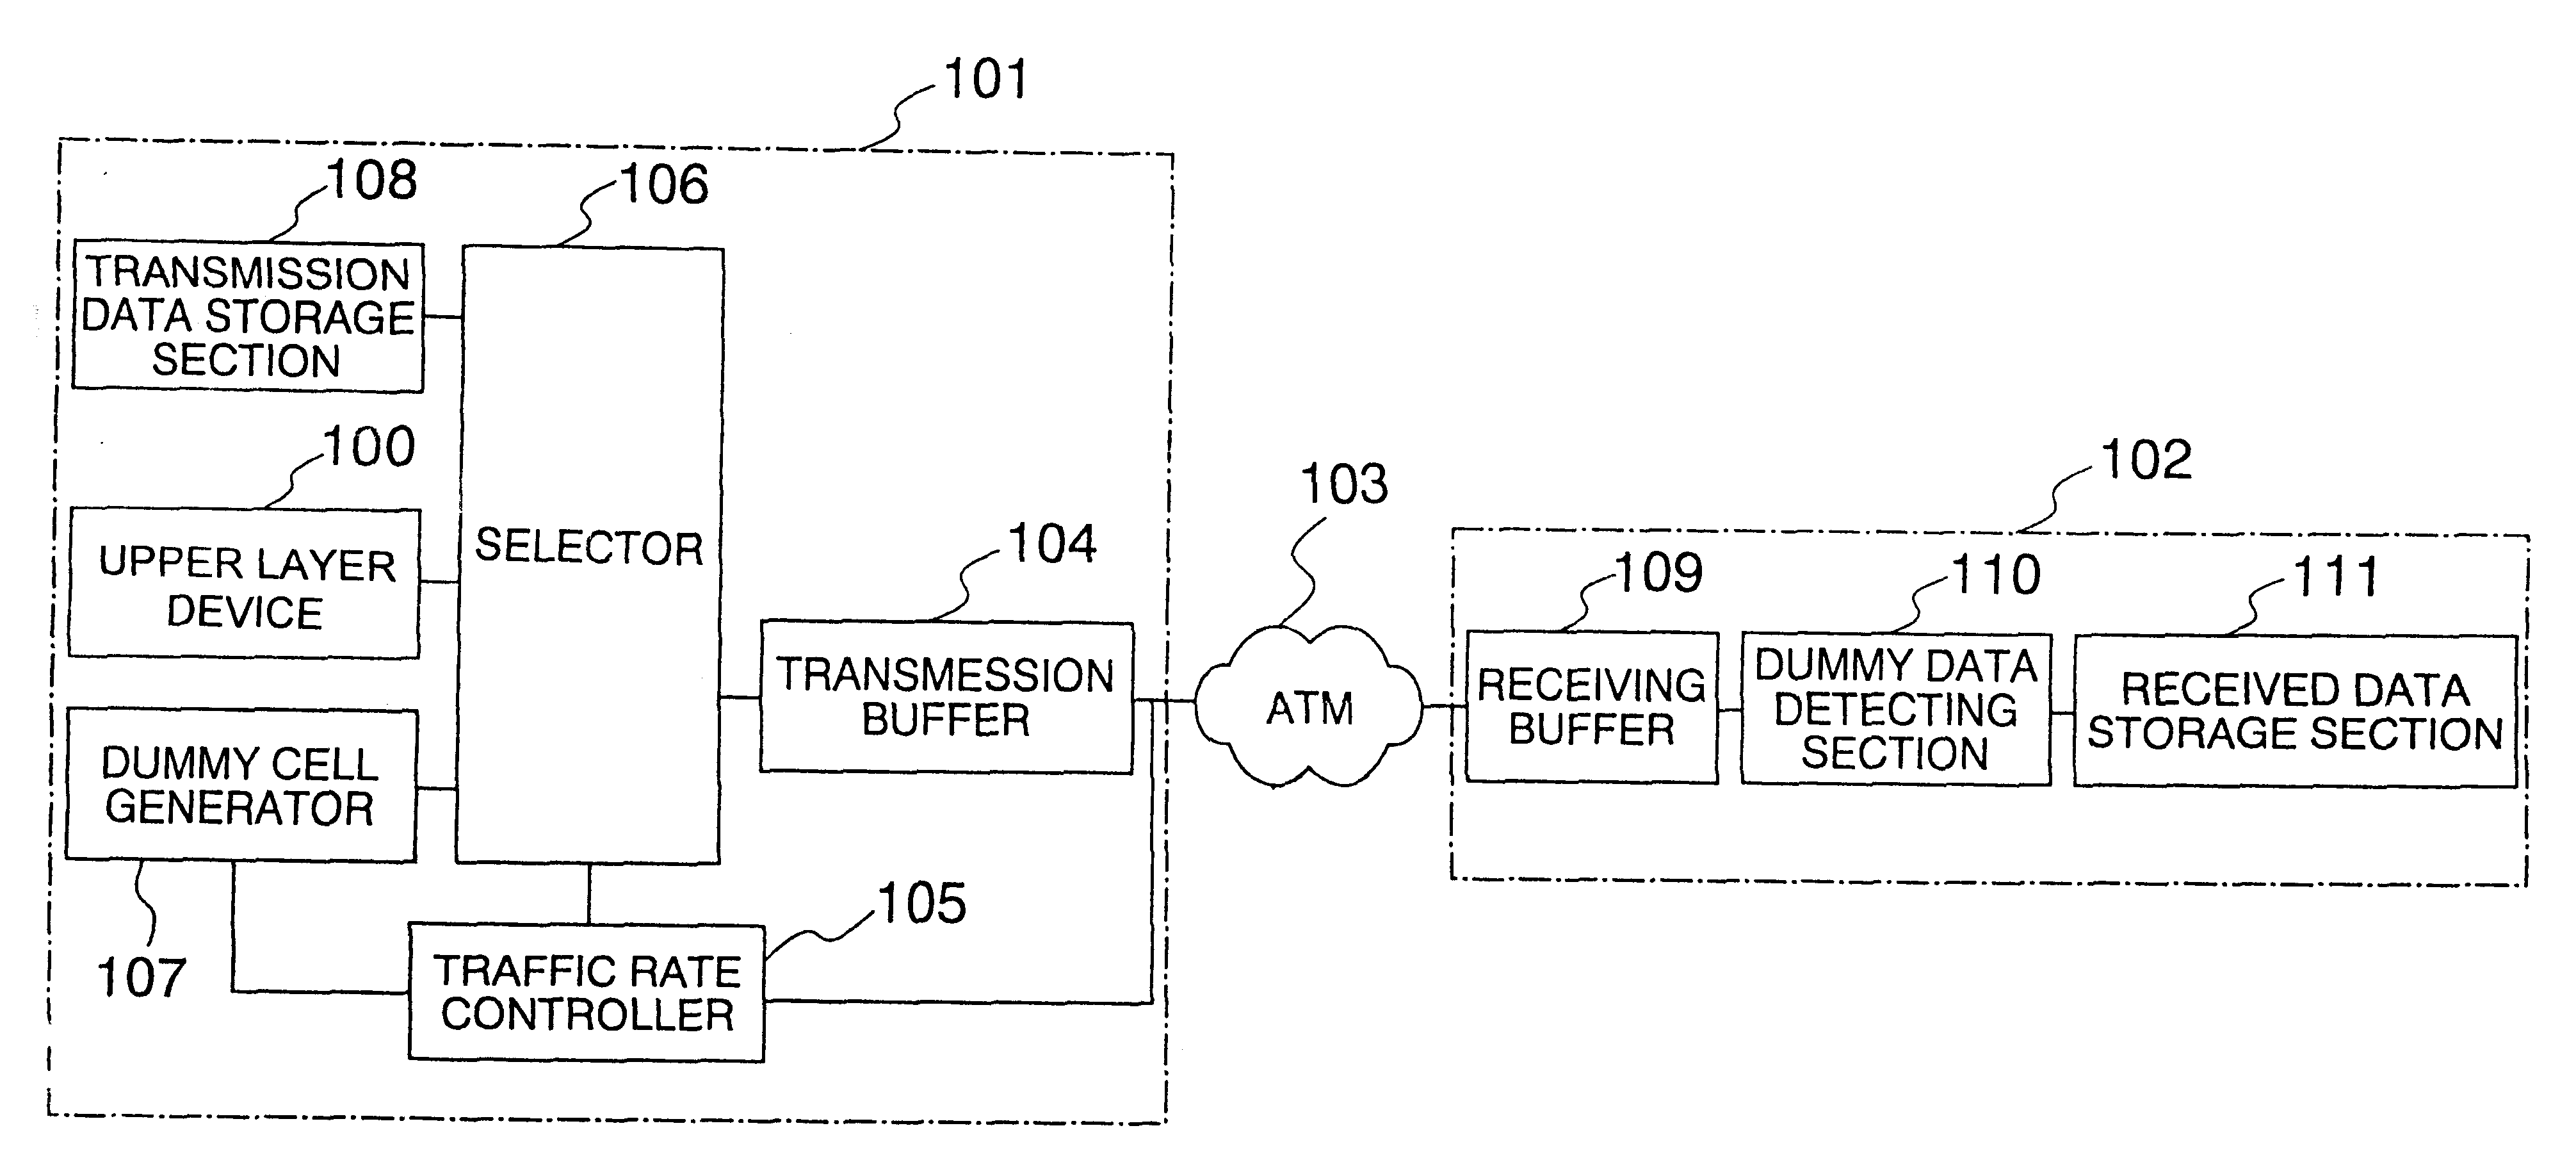 Traffic rate controller in a packet switching network